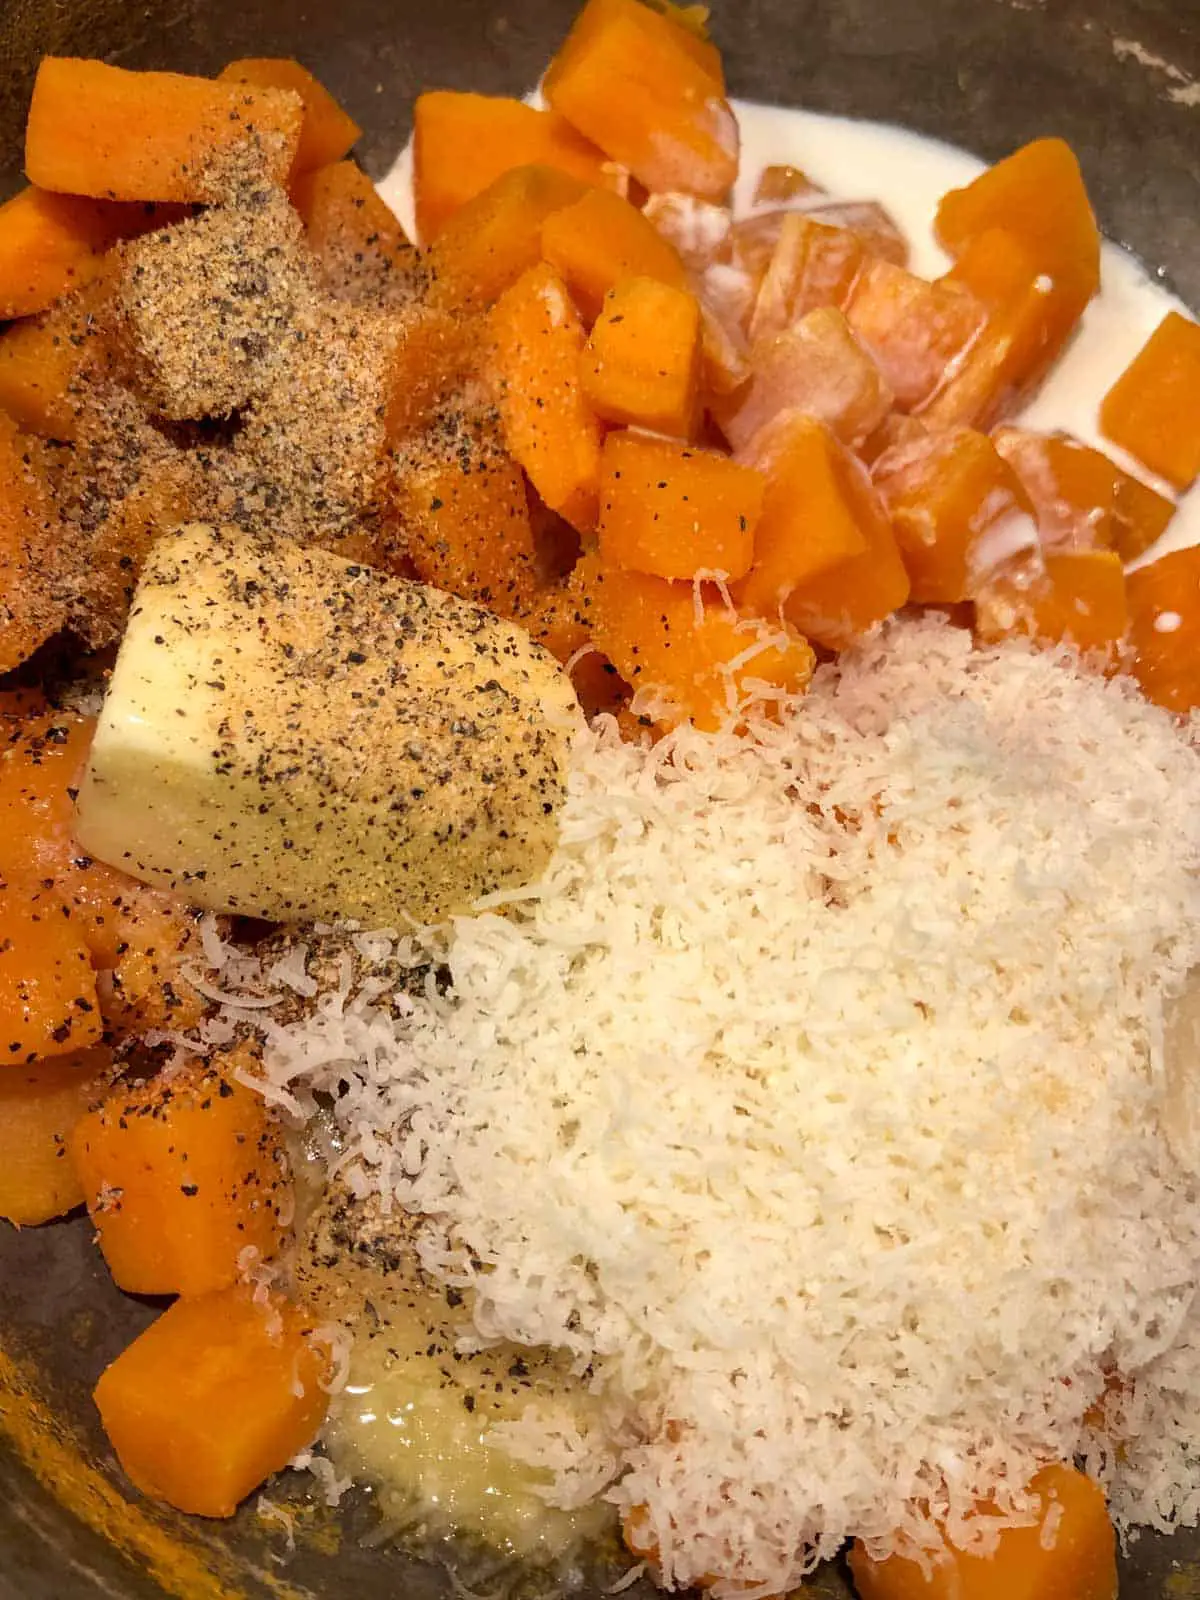 Cubes of sweet potatoes with cream, grated Parmesan cheese, butter, and seasonings in a saucepan.